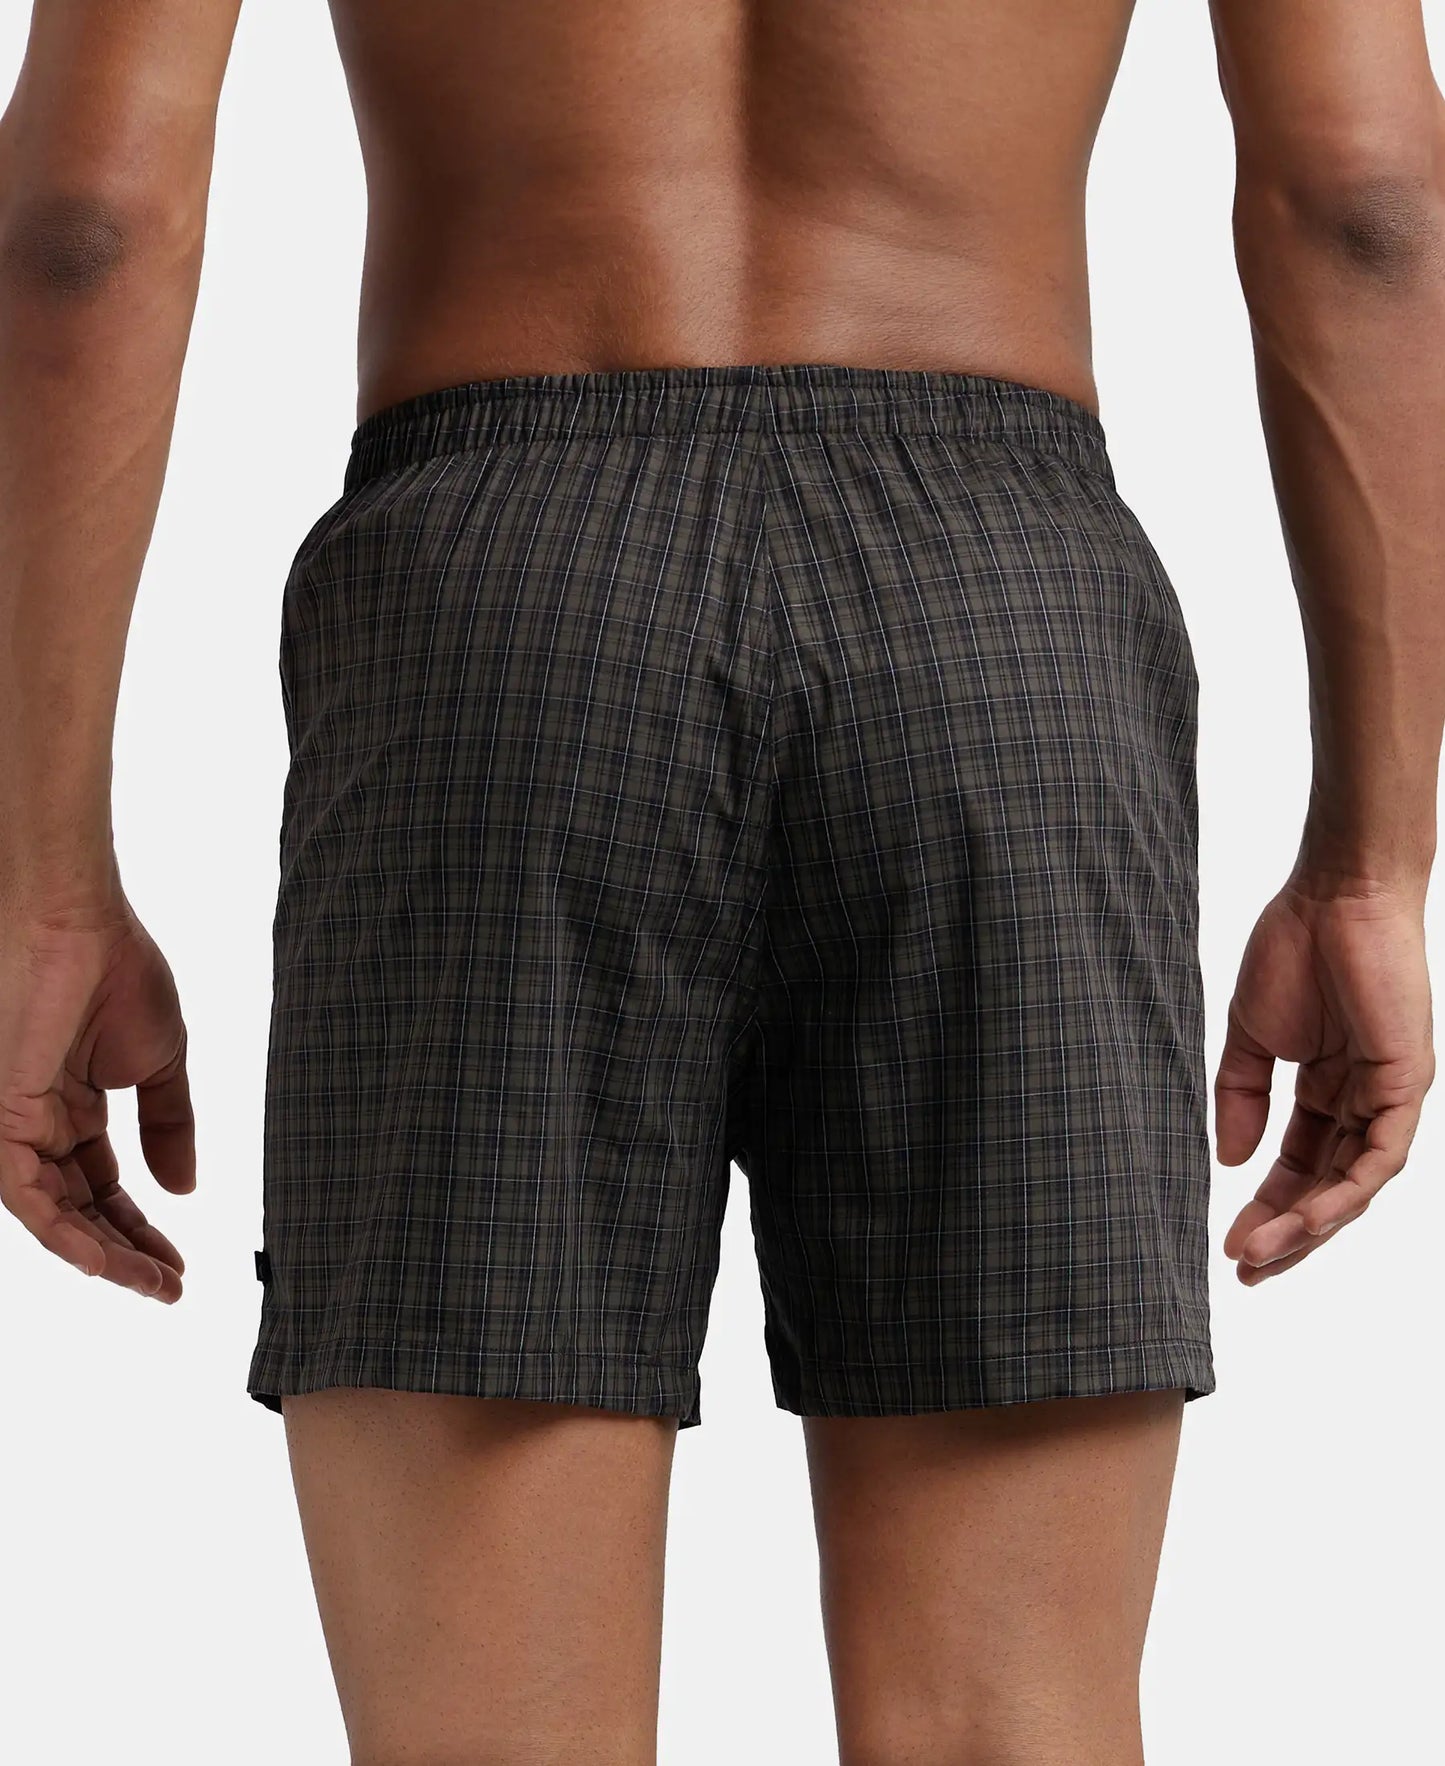 Super Combed Mercerized Cotton Woven Checkered Inner Boxers with Ultrasoft and Durable Inner Waistband - Grey-7